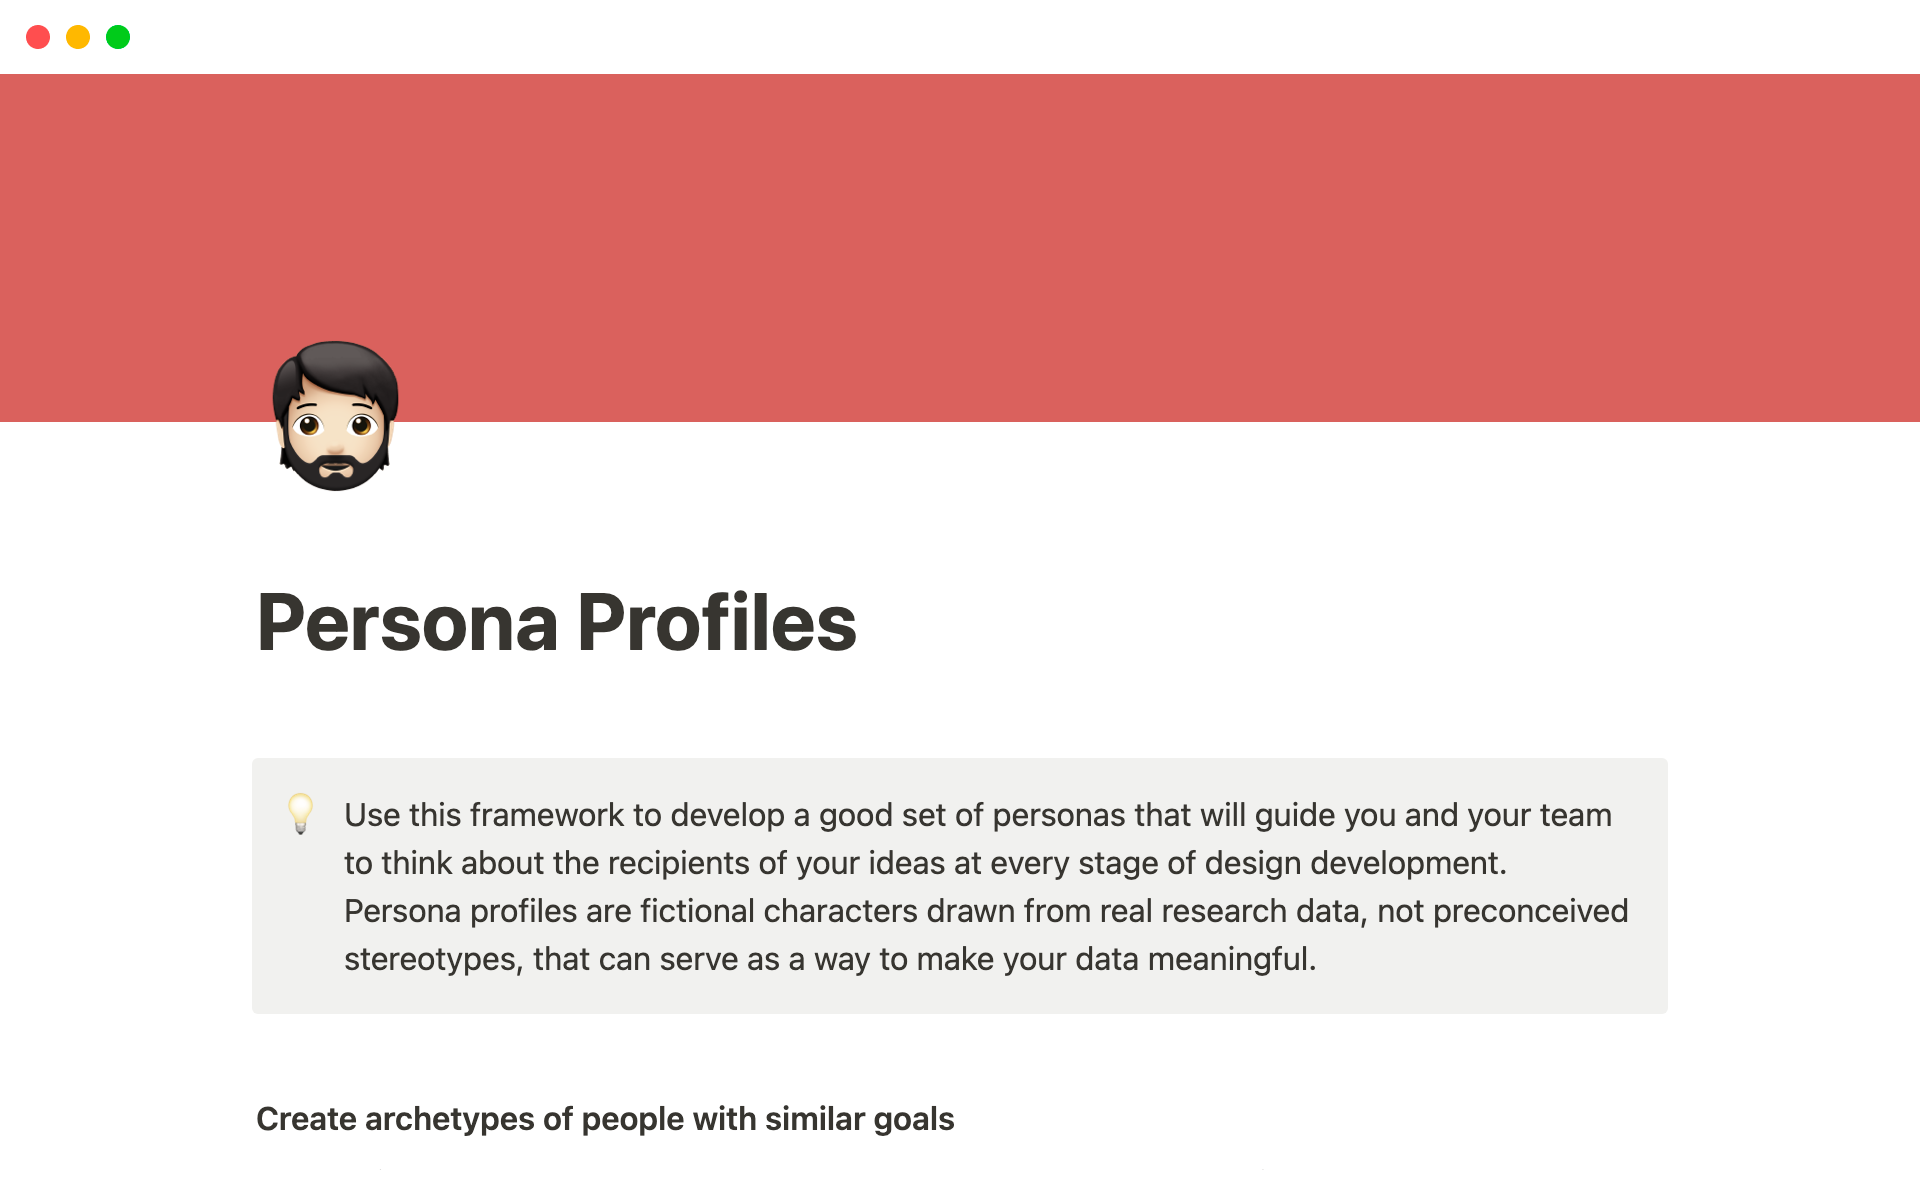 Use this framework to develop a good set of personas that will guide you and your team to think about the recipients of your ideas at every stage of design development.